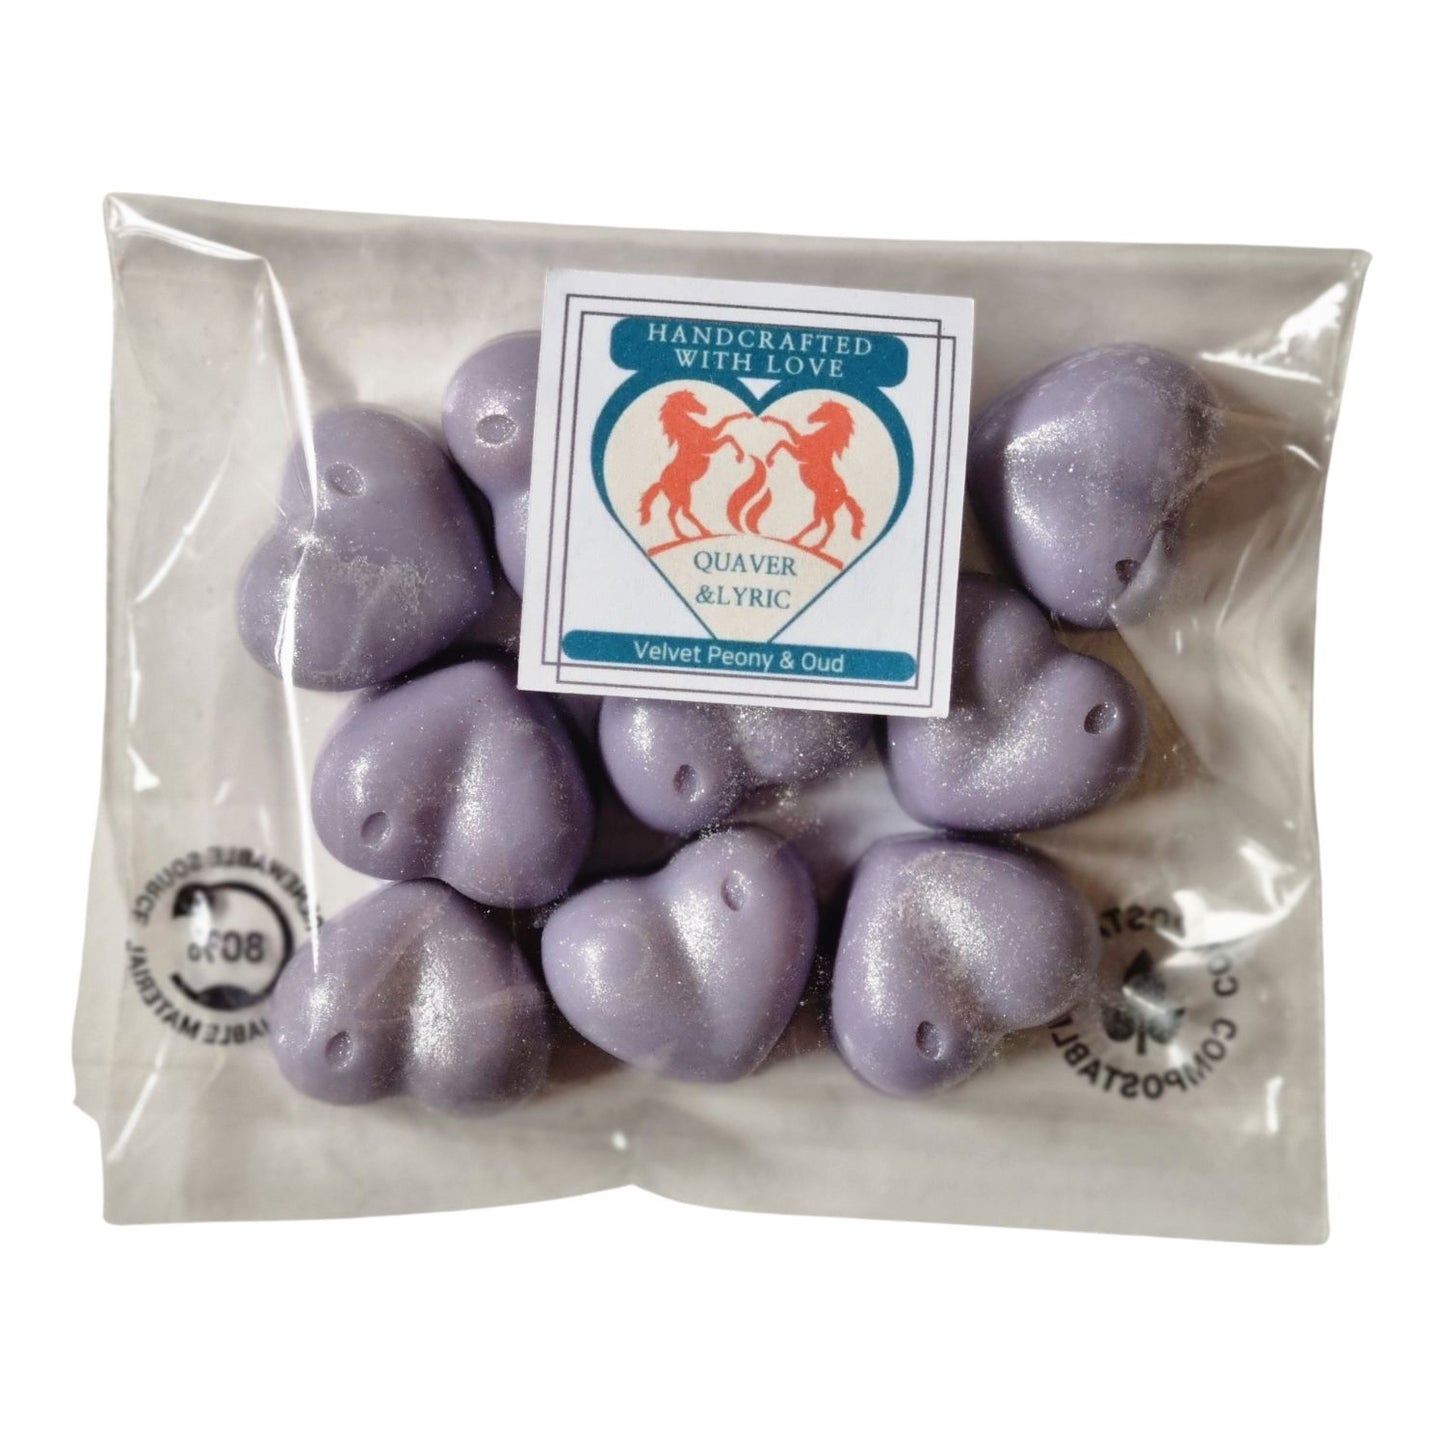 ten lilac heart shaped soy wax melts in a packet with Quaver and Lyric branding